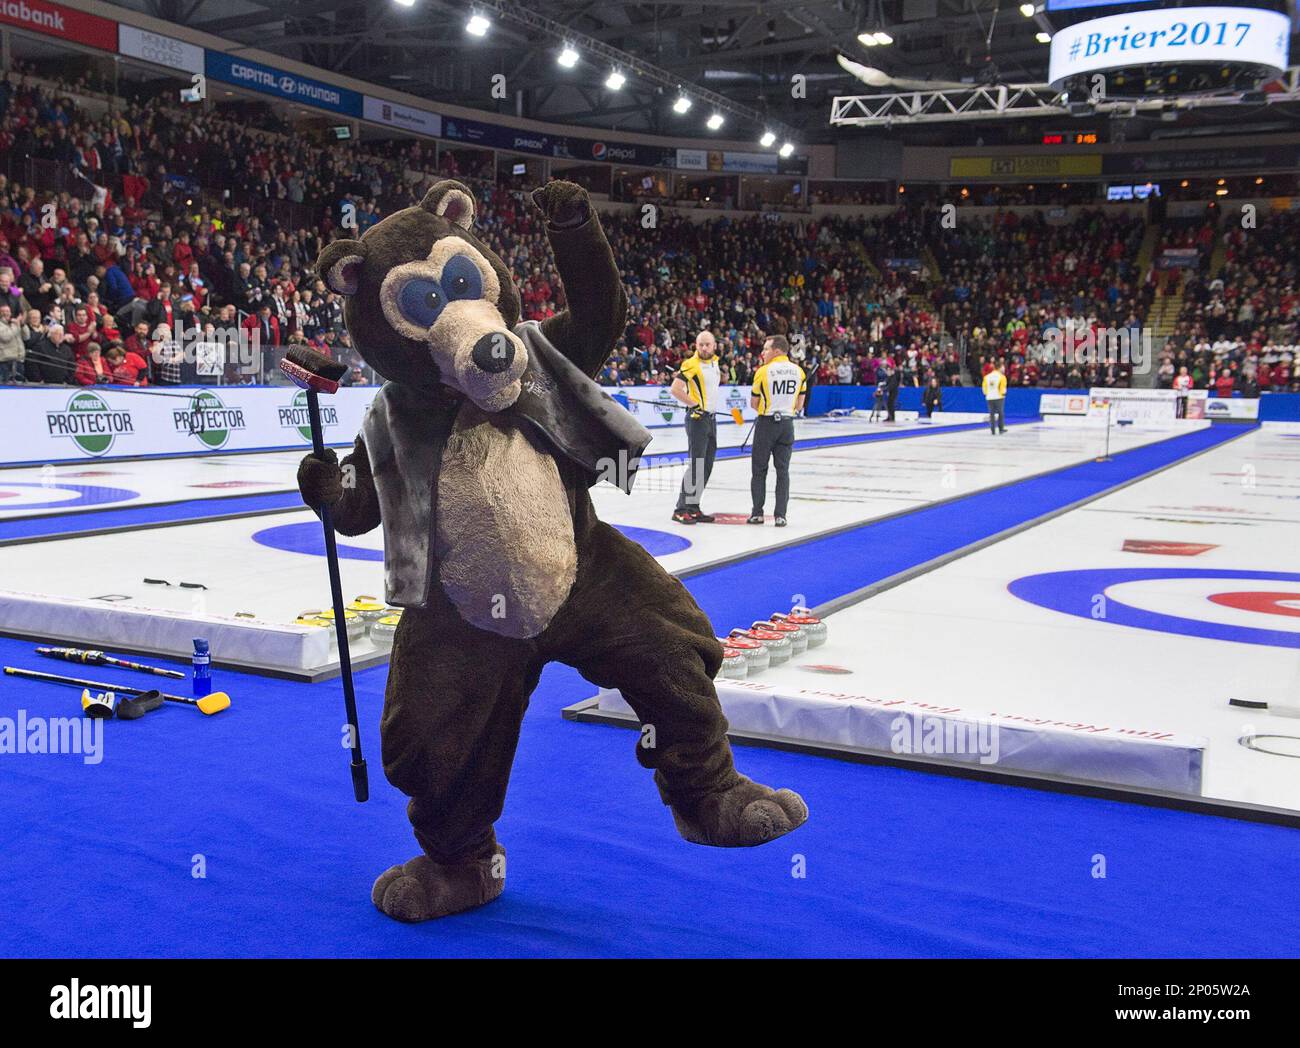 Reg Caughie, who has entertained curling fans as the mascot Brier Bear, salutes the crowd after being named to the Canadian Curling Hall of Fame, at the Tim Hortons Brier curling championship